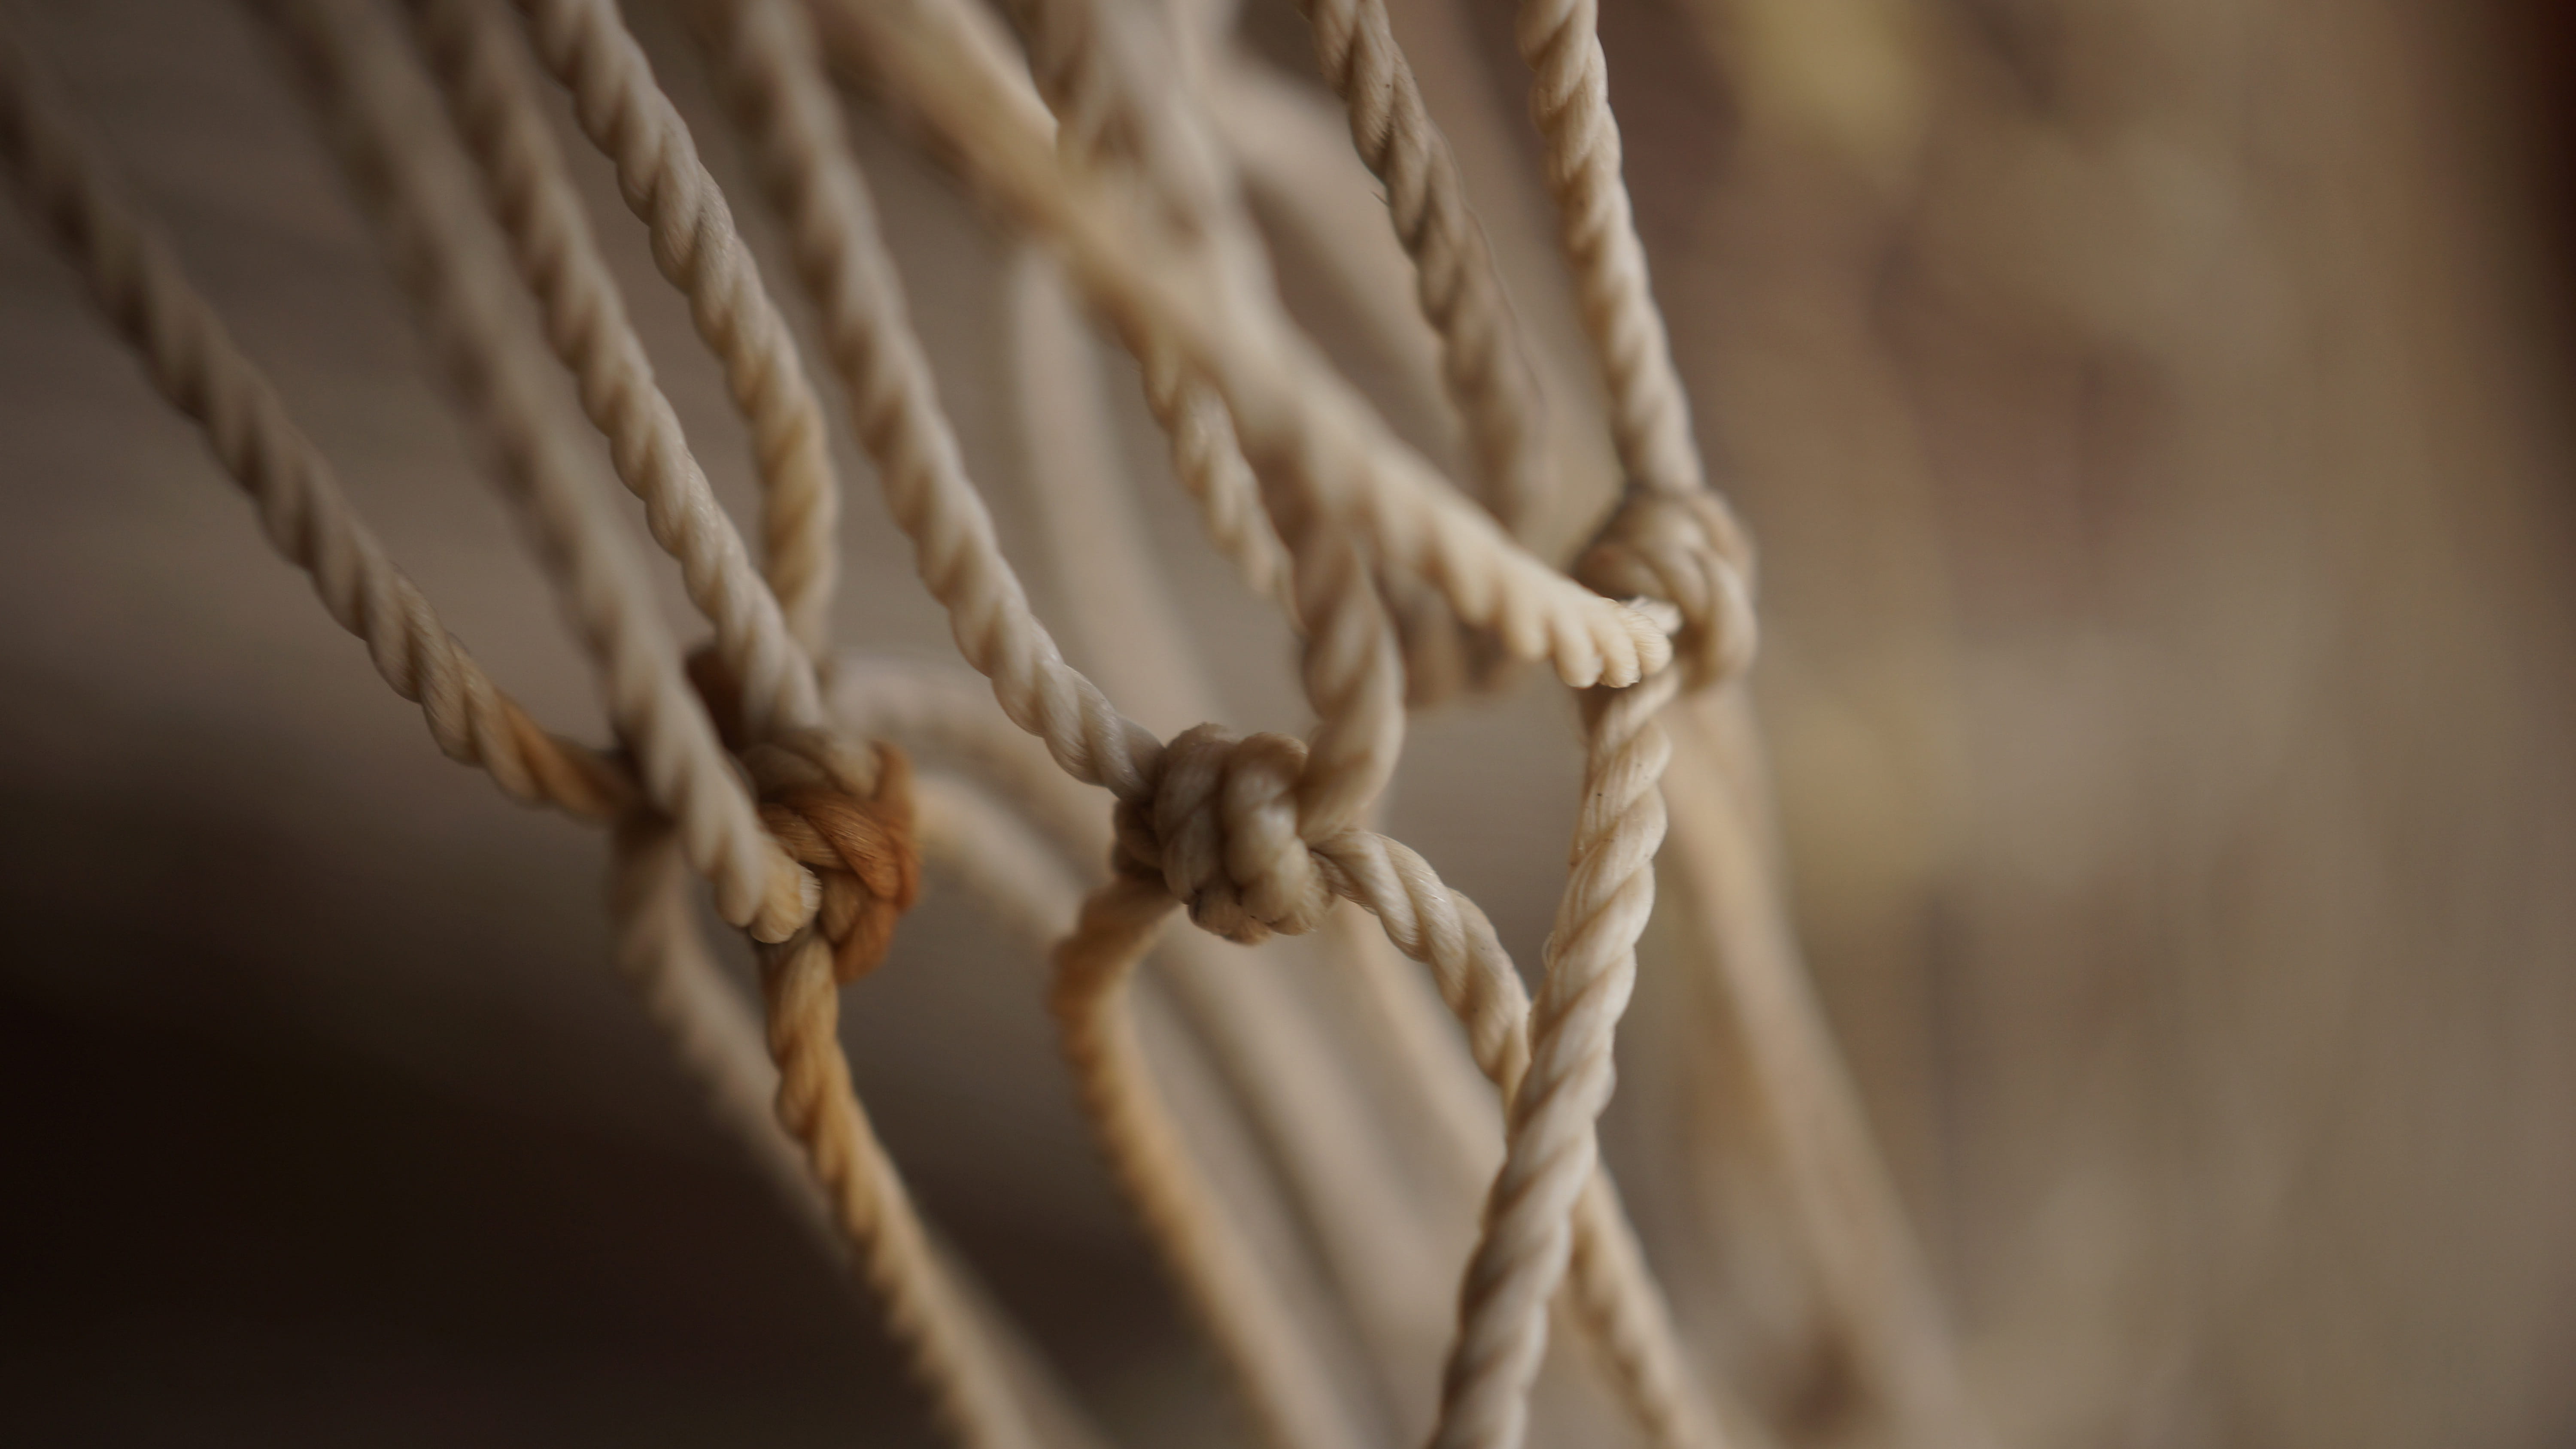 net, rope, string, knots, close-up, no people, tied up, strength